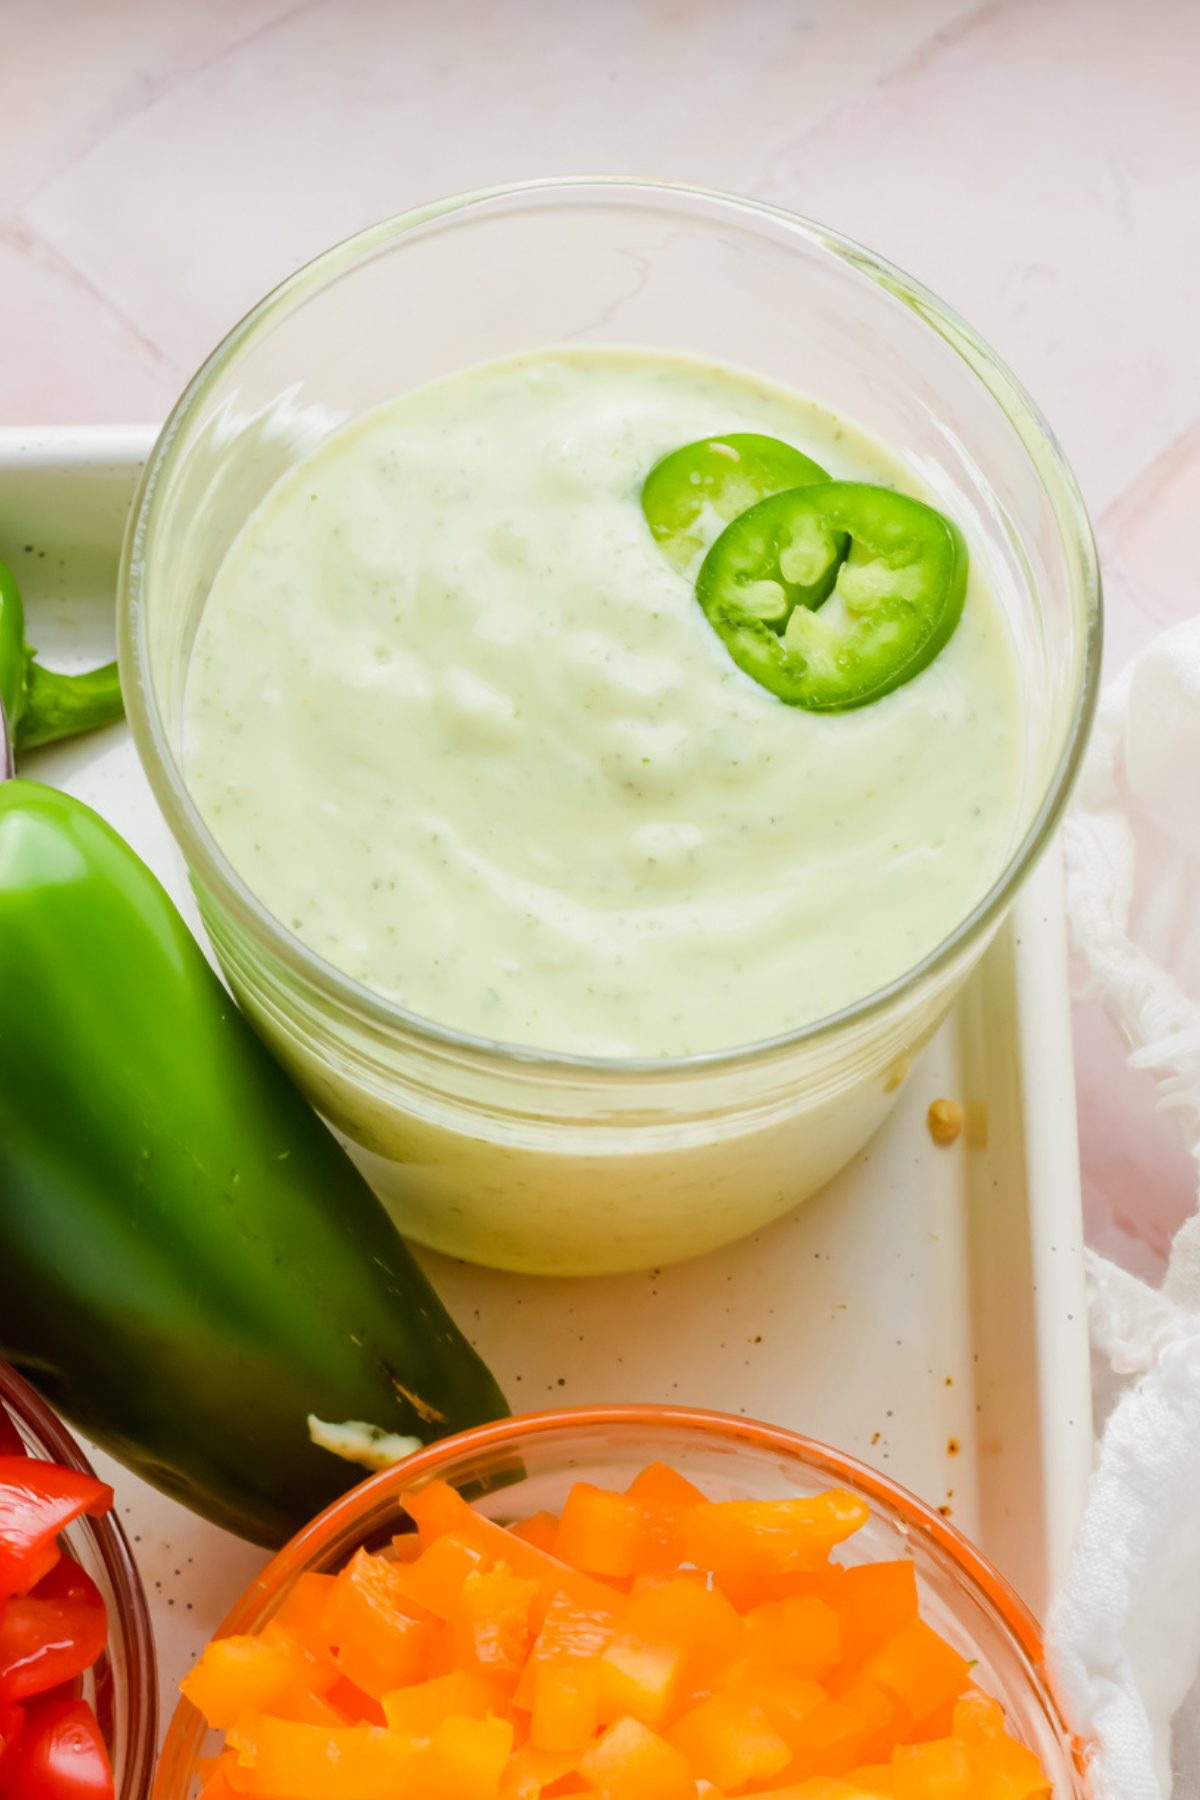 creamy jalapeno sauce in glass beaker beside fresh jalapeno and small bowls of chopped peppers, tomatoes, and onion.